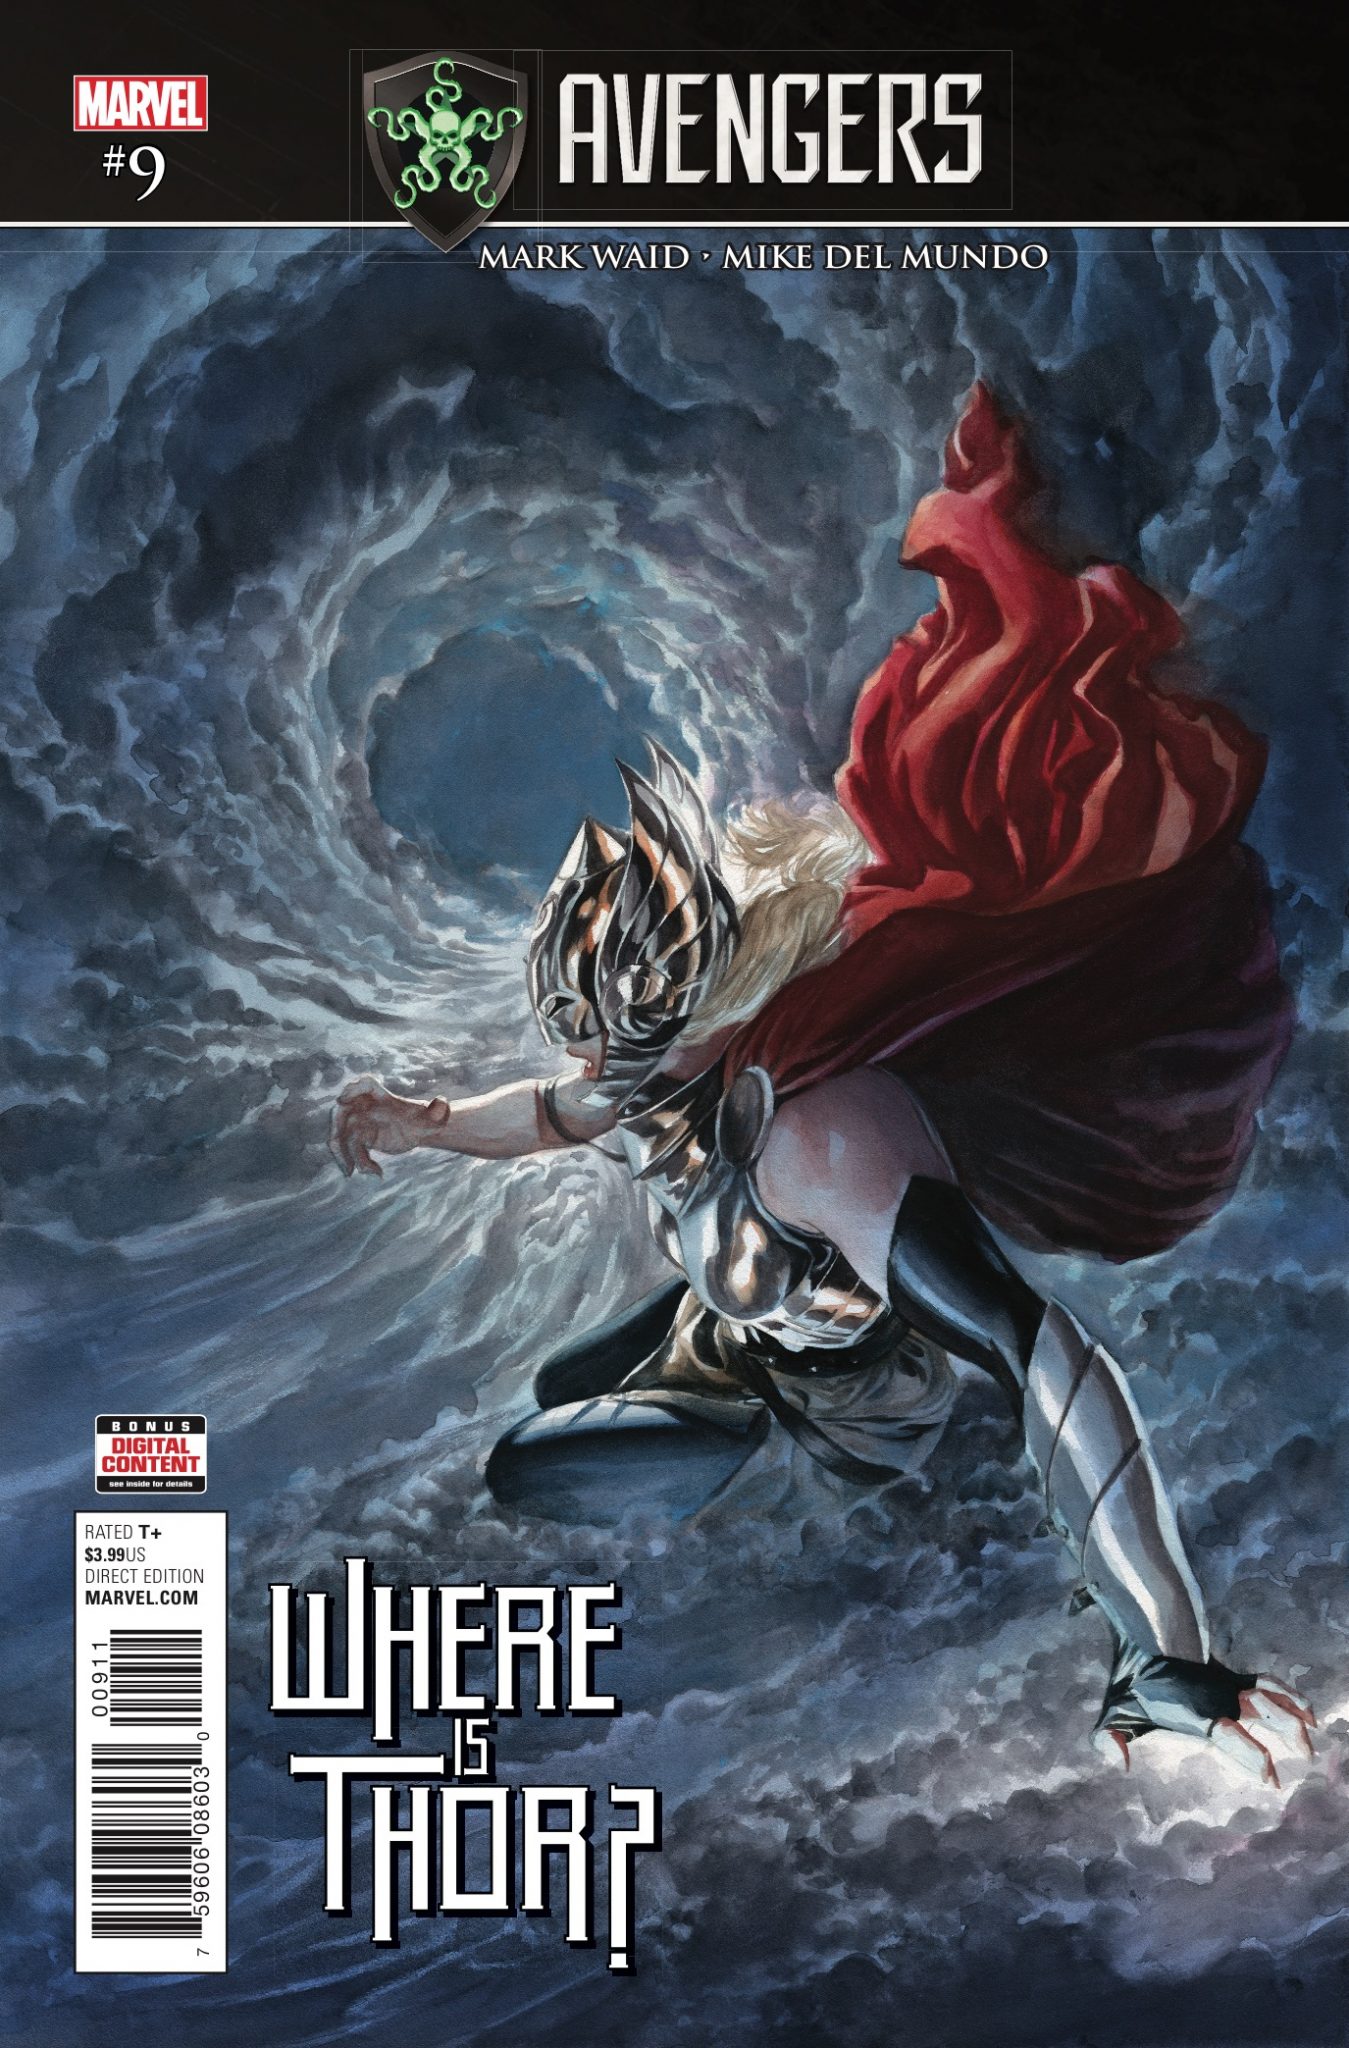 Avengers #9 Review